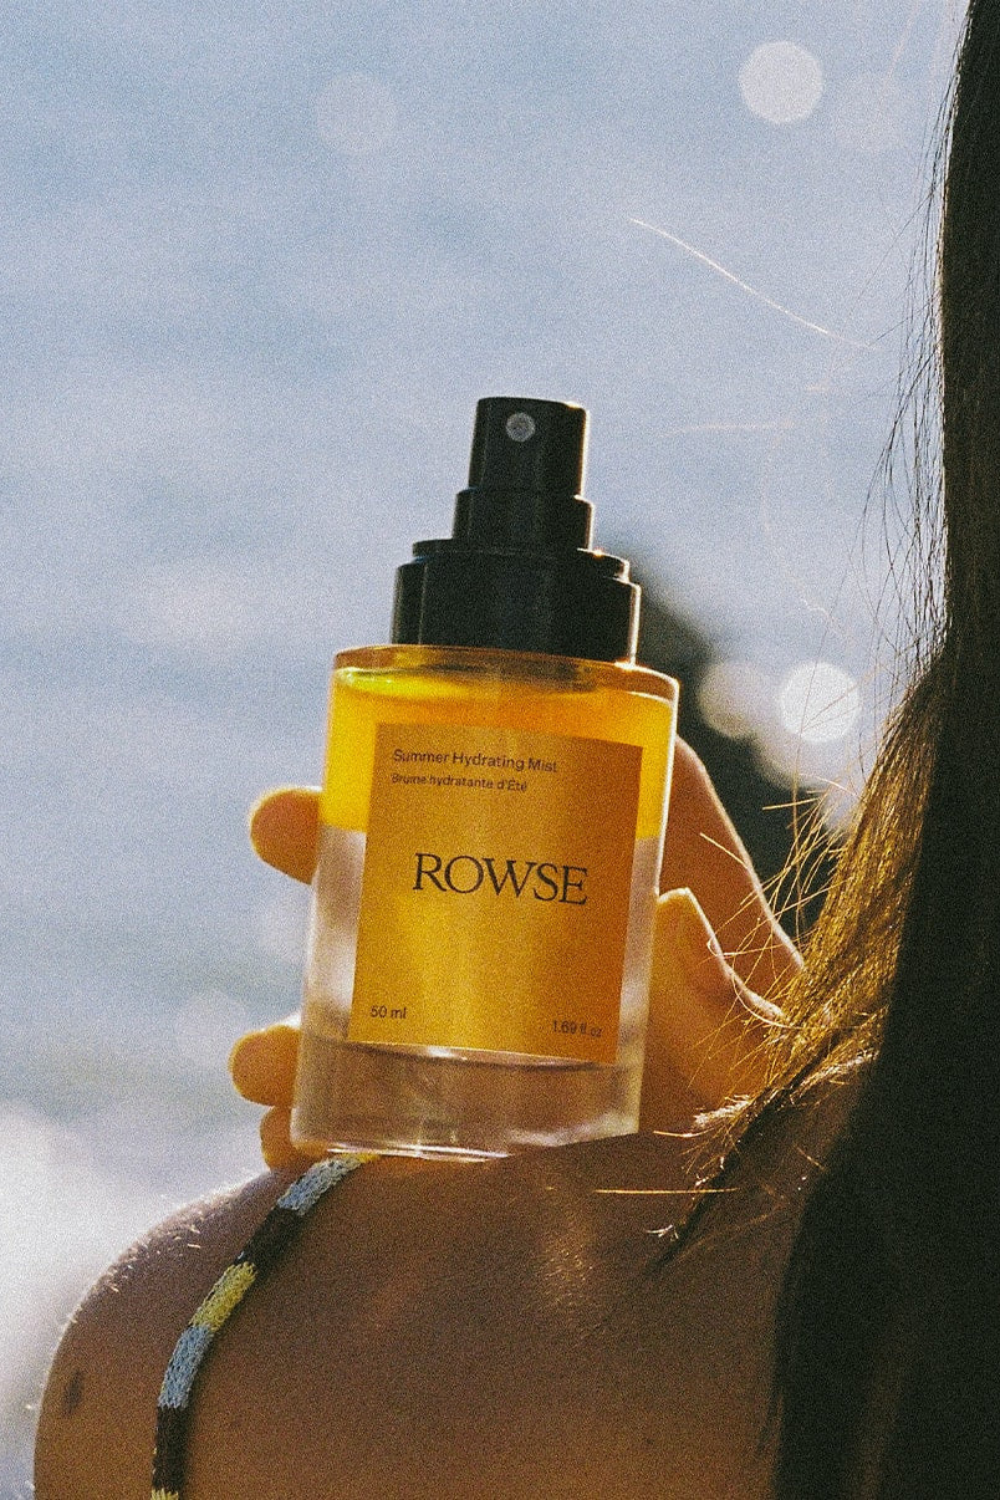 ROWSE SUMMER HYDRATING MIST